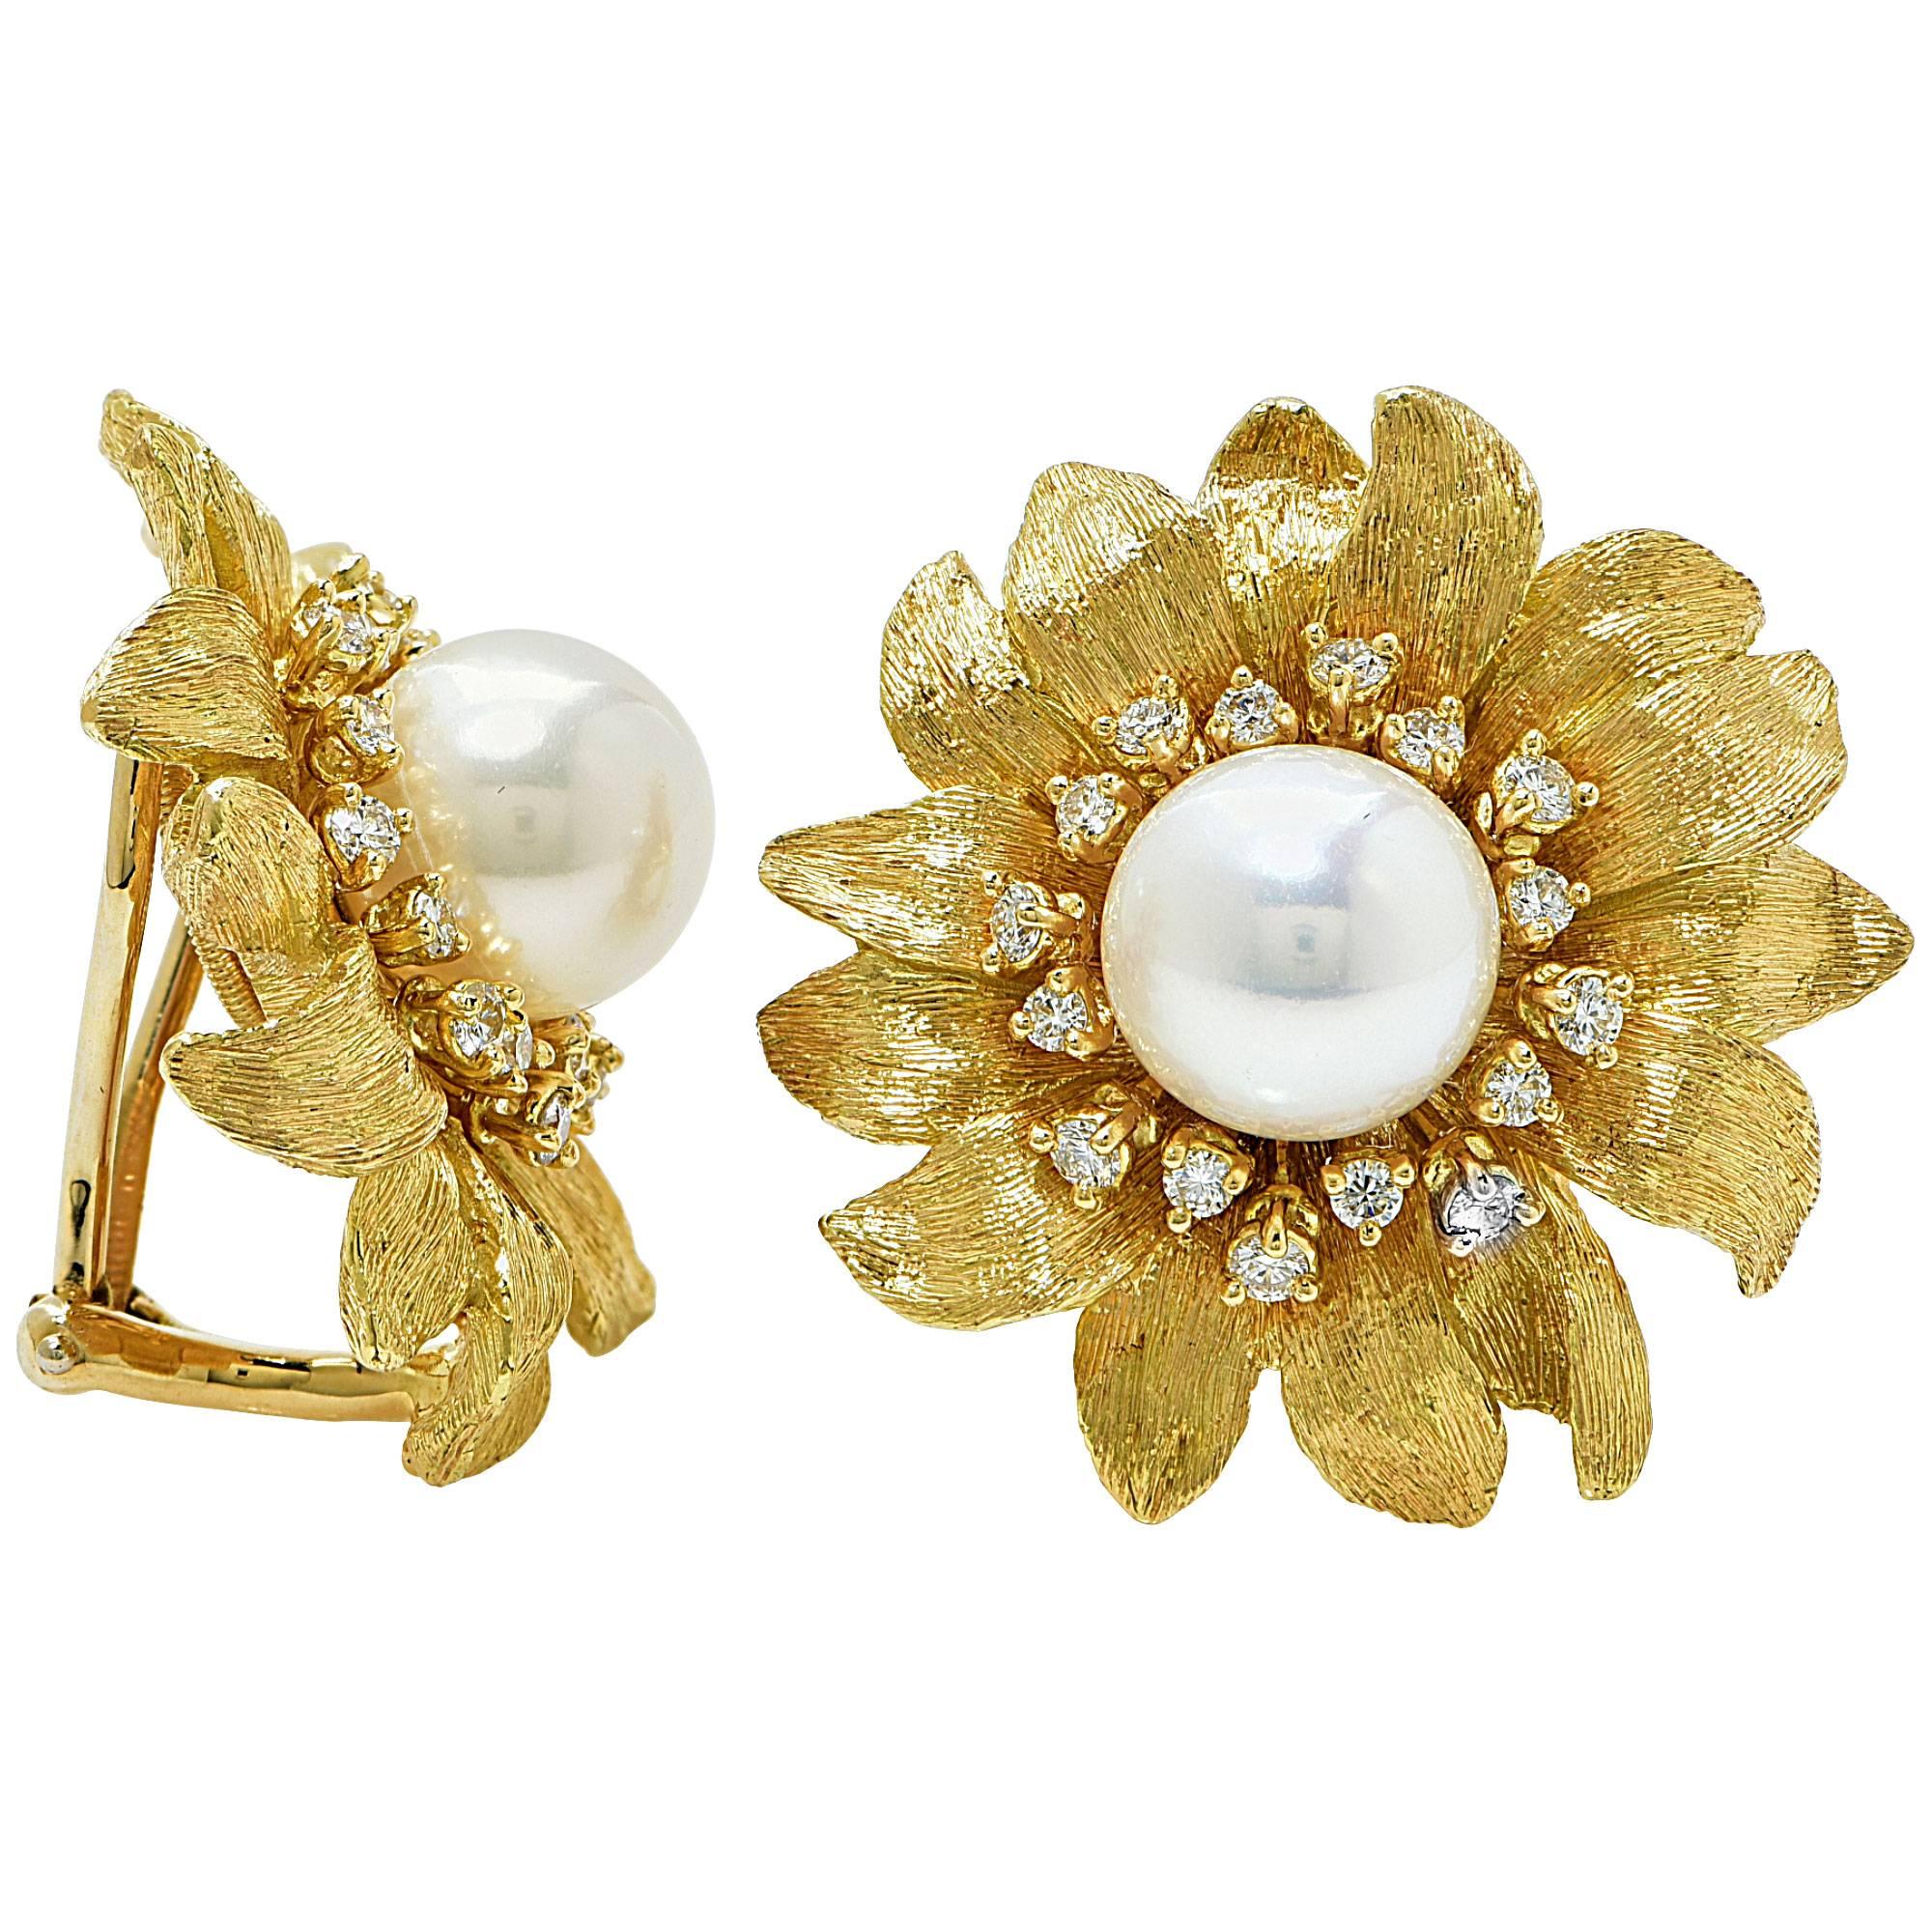 18K yellow gold brush finish flower earrings featuring a large akoya pearl with in a frame of 32 round brilliant cut diamonds weighing approximately 1.75cts F-G Color and VVS clarity.

These beautiful earrings are signed Bielka from the Sunflower